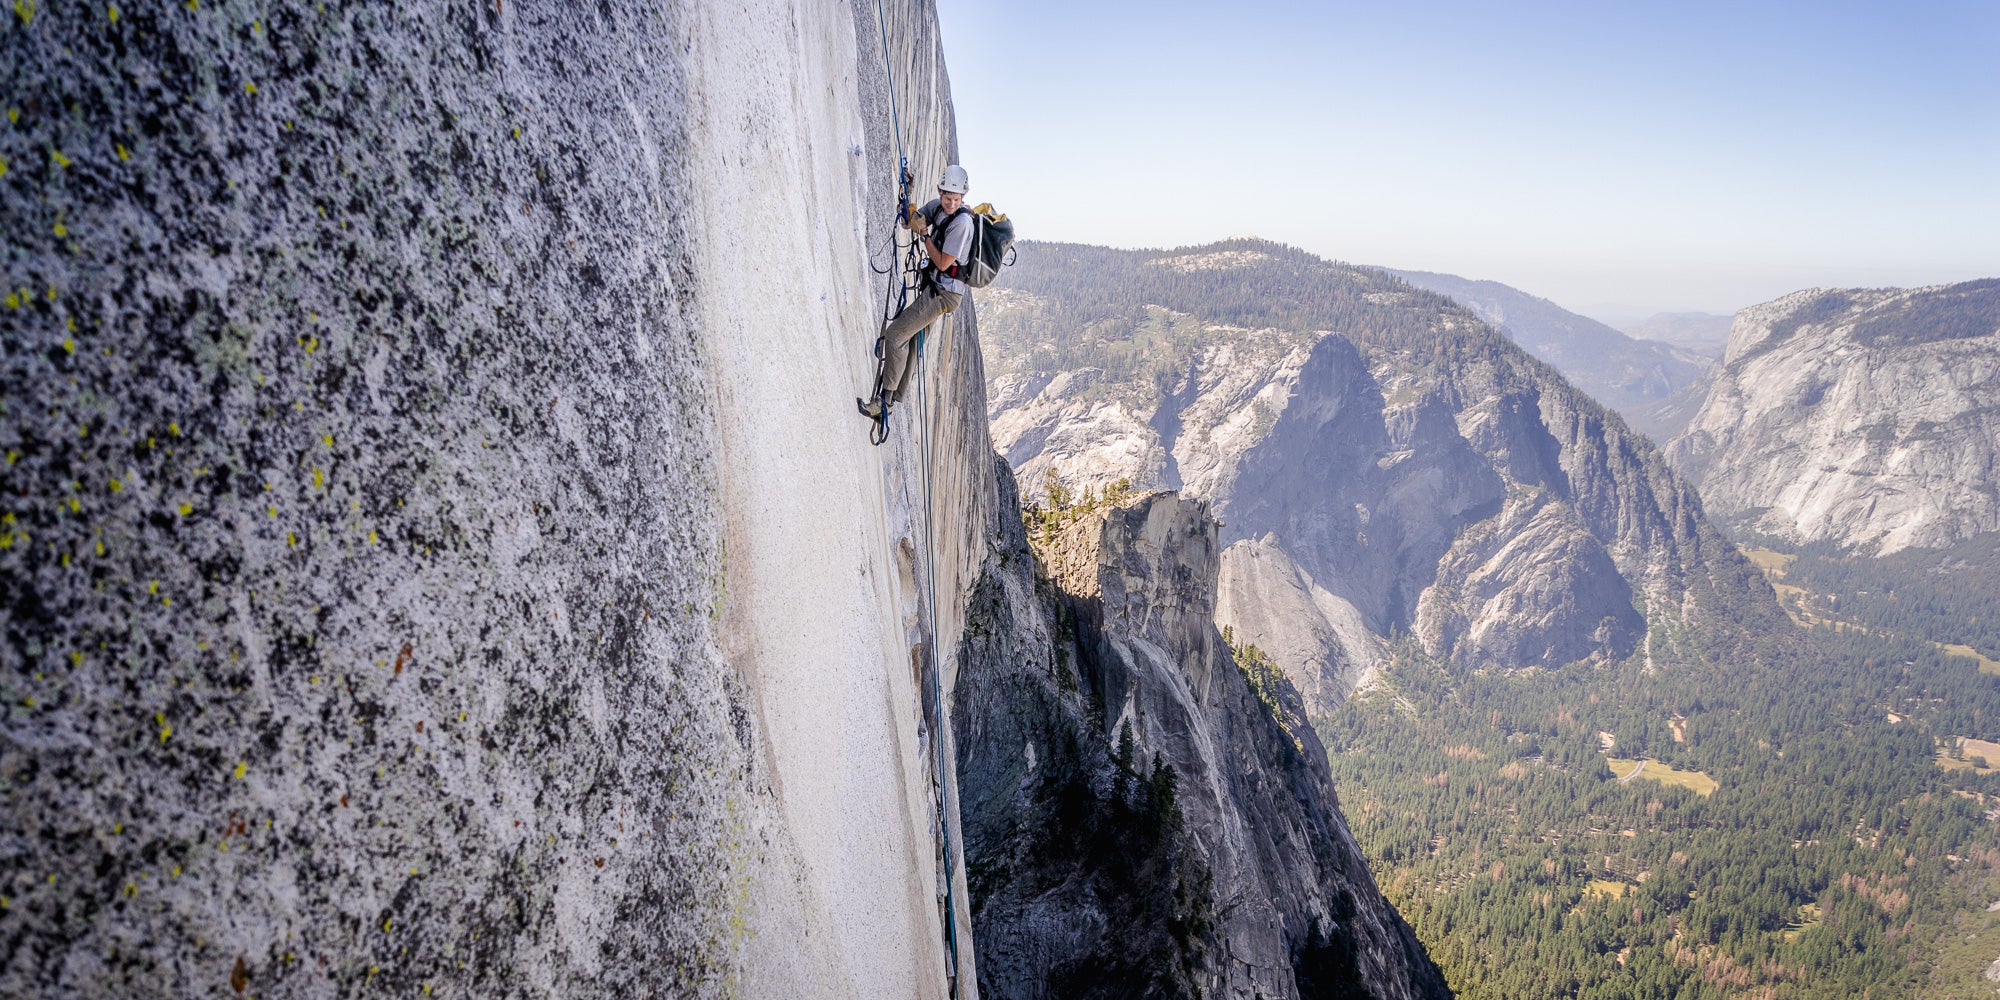 How I Almost Died Climbing Yosemite's Half Dome